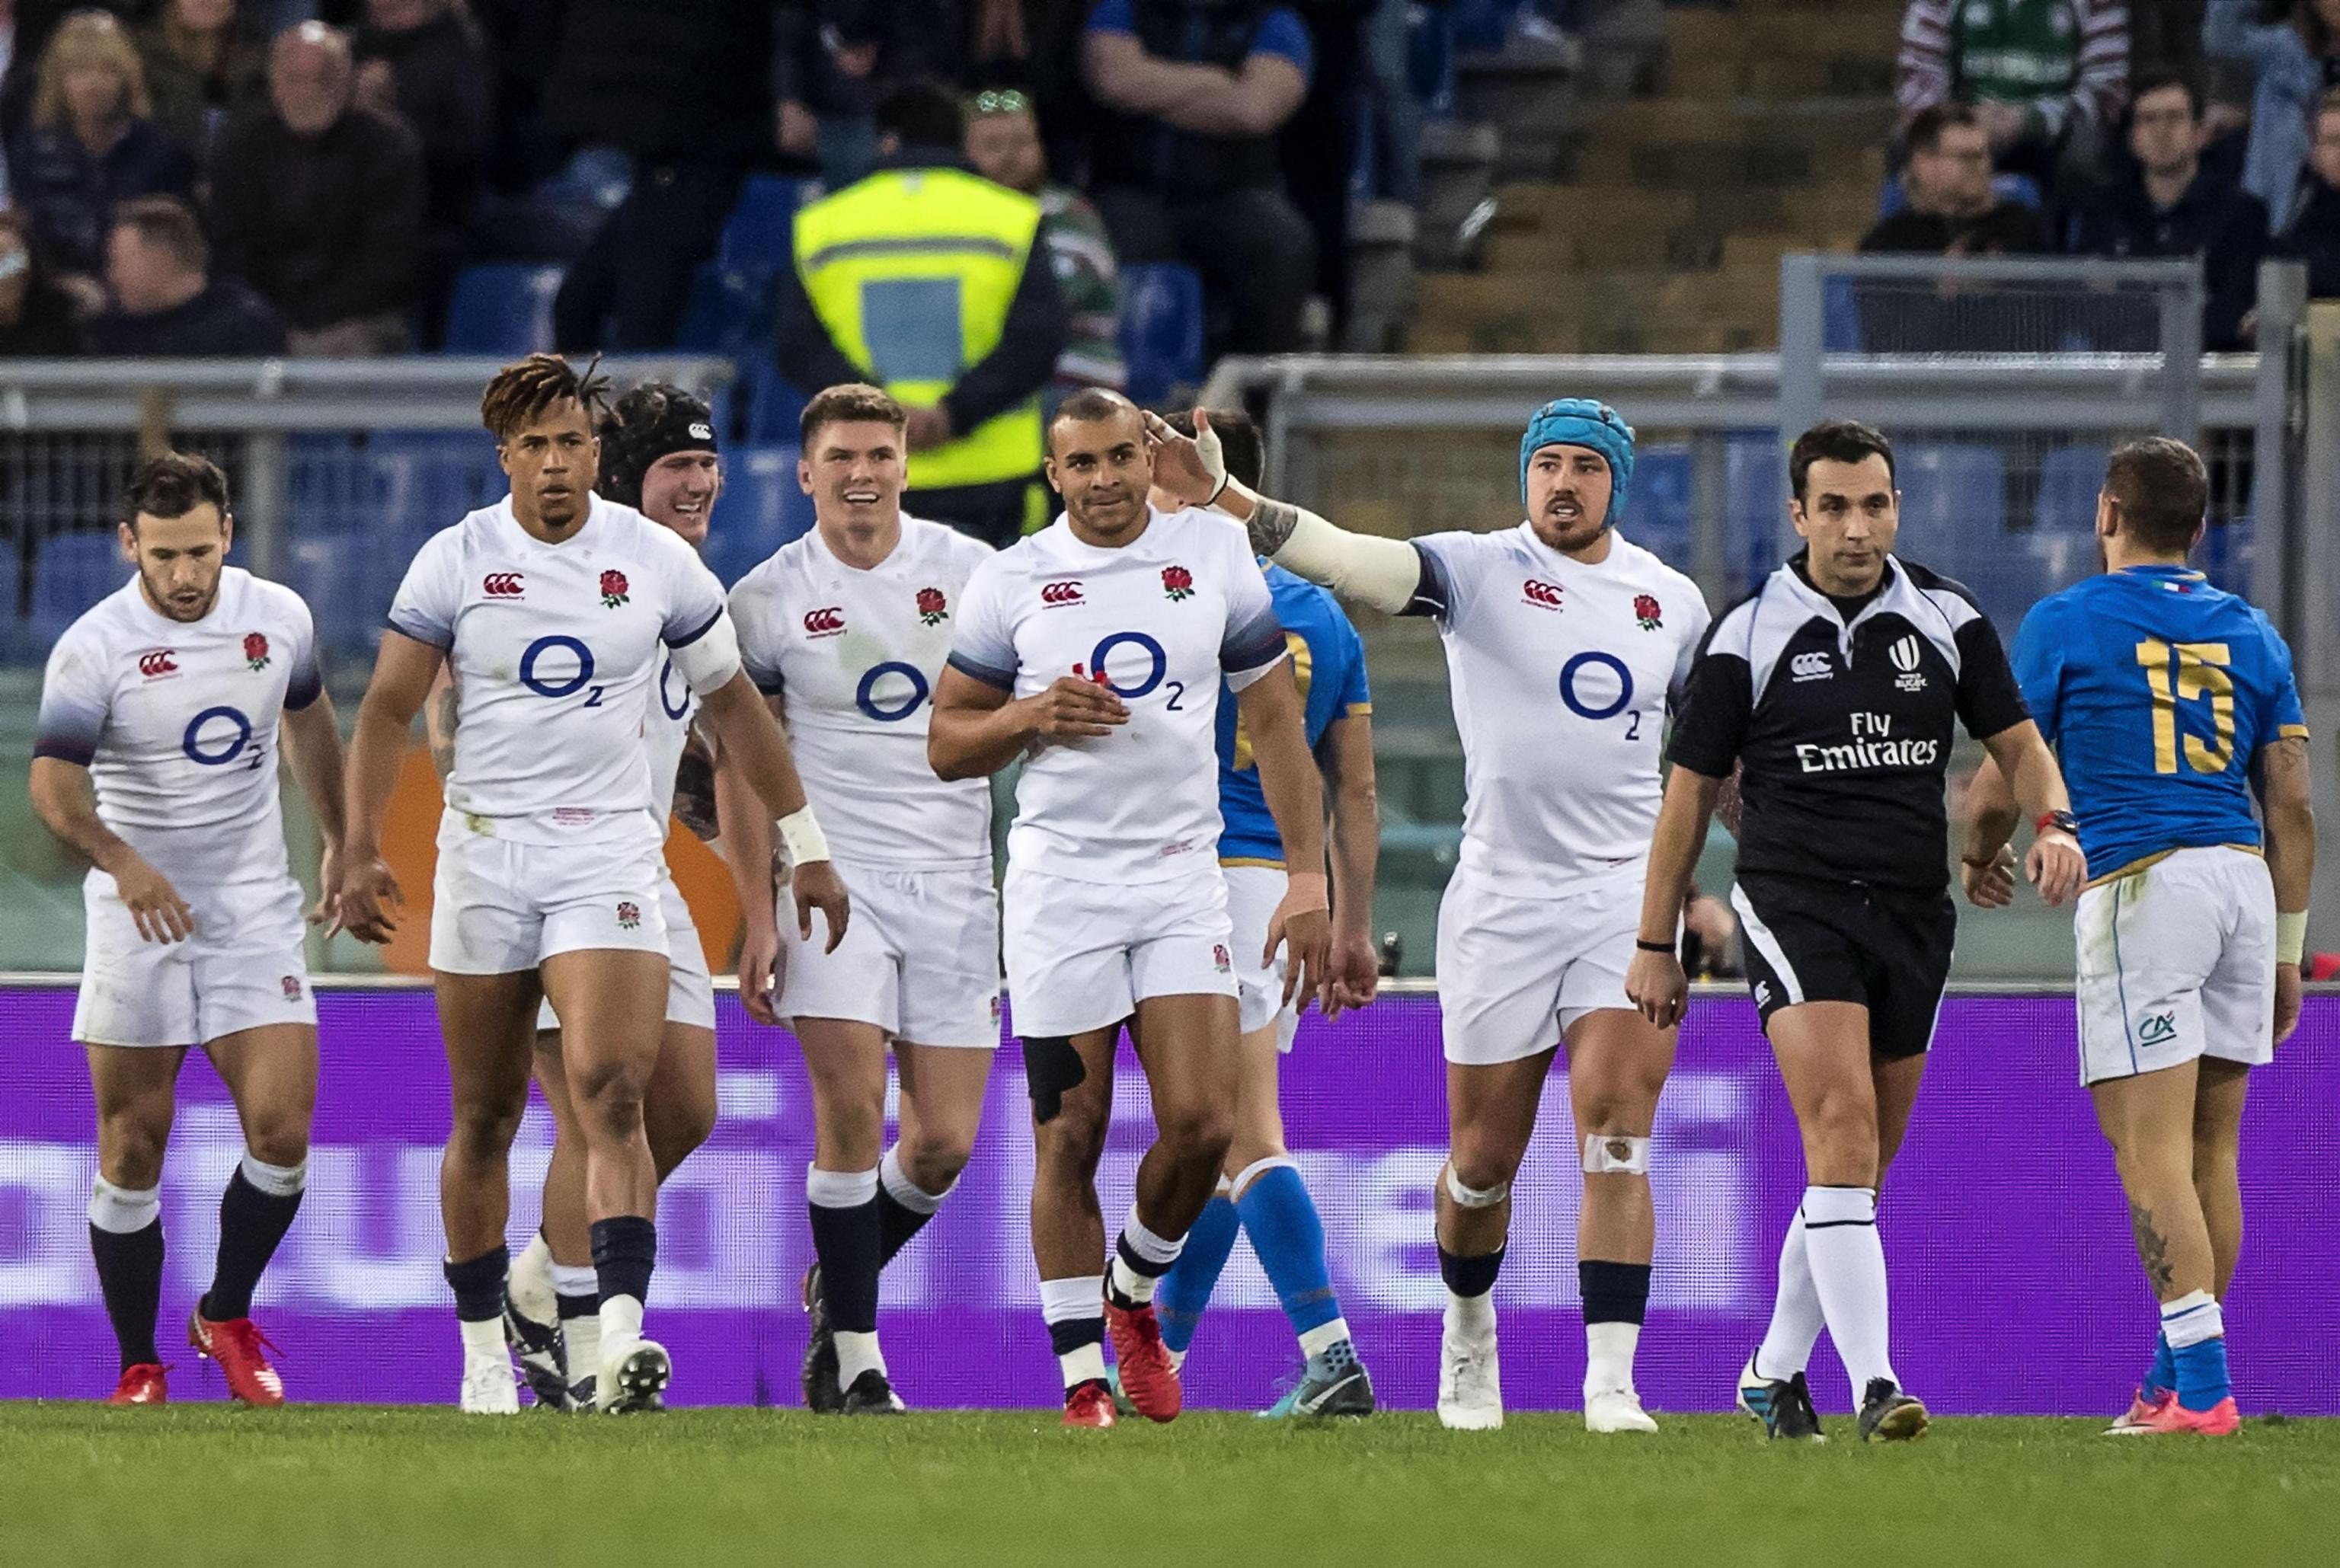 England coach Eddie Jones said rugby fans had been treated to a great opening weekend in the Six Nations Championship. Photo: EPA